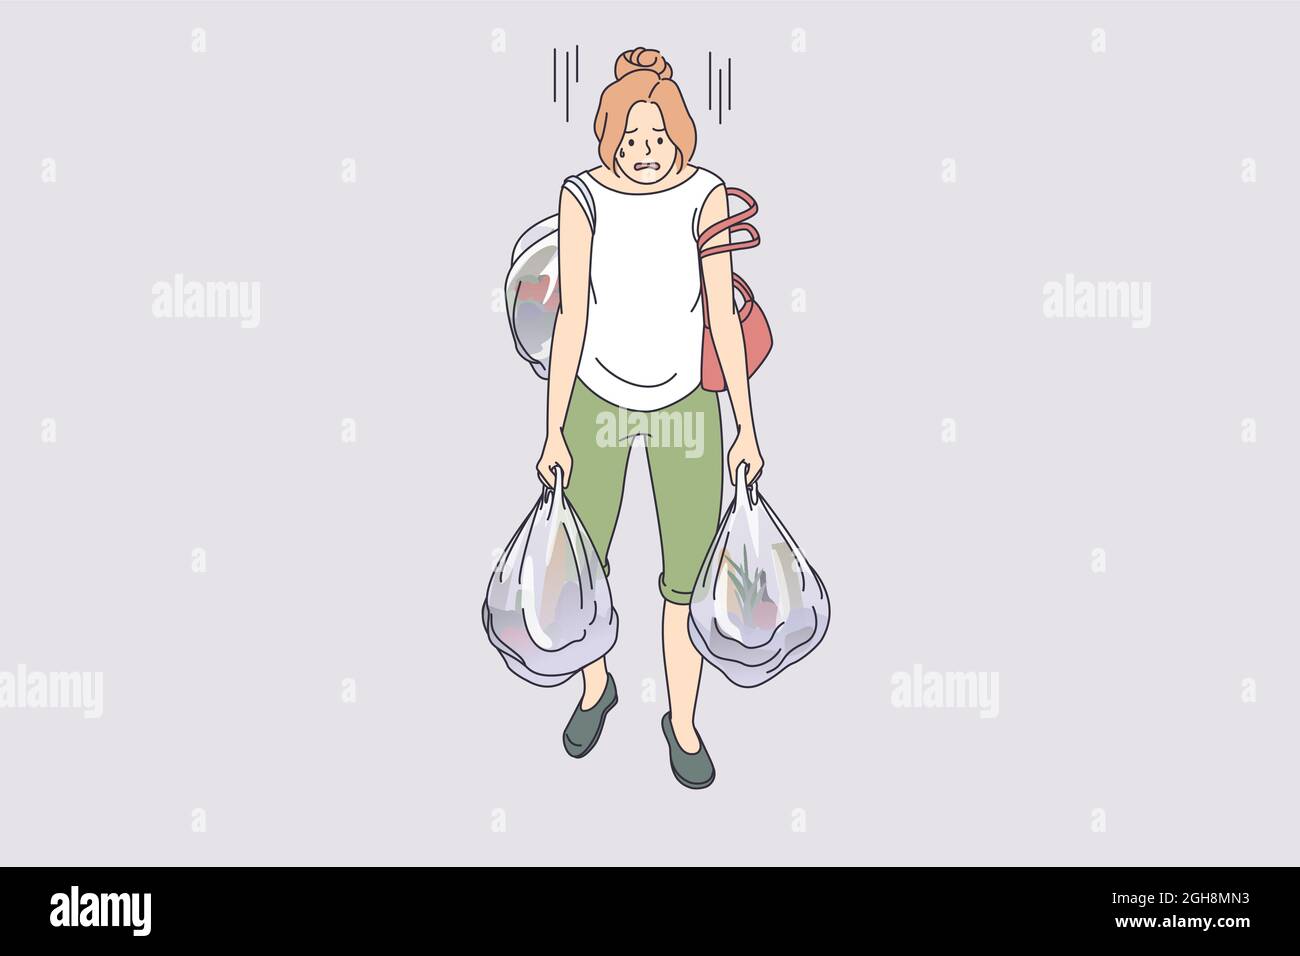 Carrying heavy bags tiredness concept. Young exhausted tired woman cartoon character going carrying many heavy shopping bags full of food from supermarket vector illustration  Stock Vector